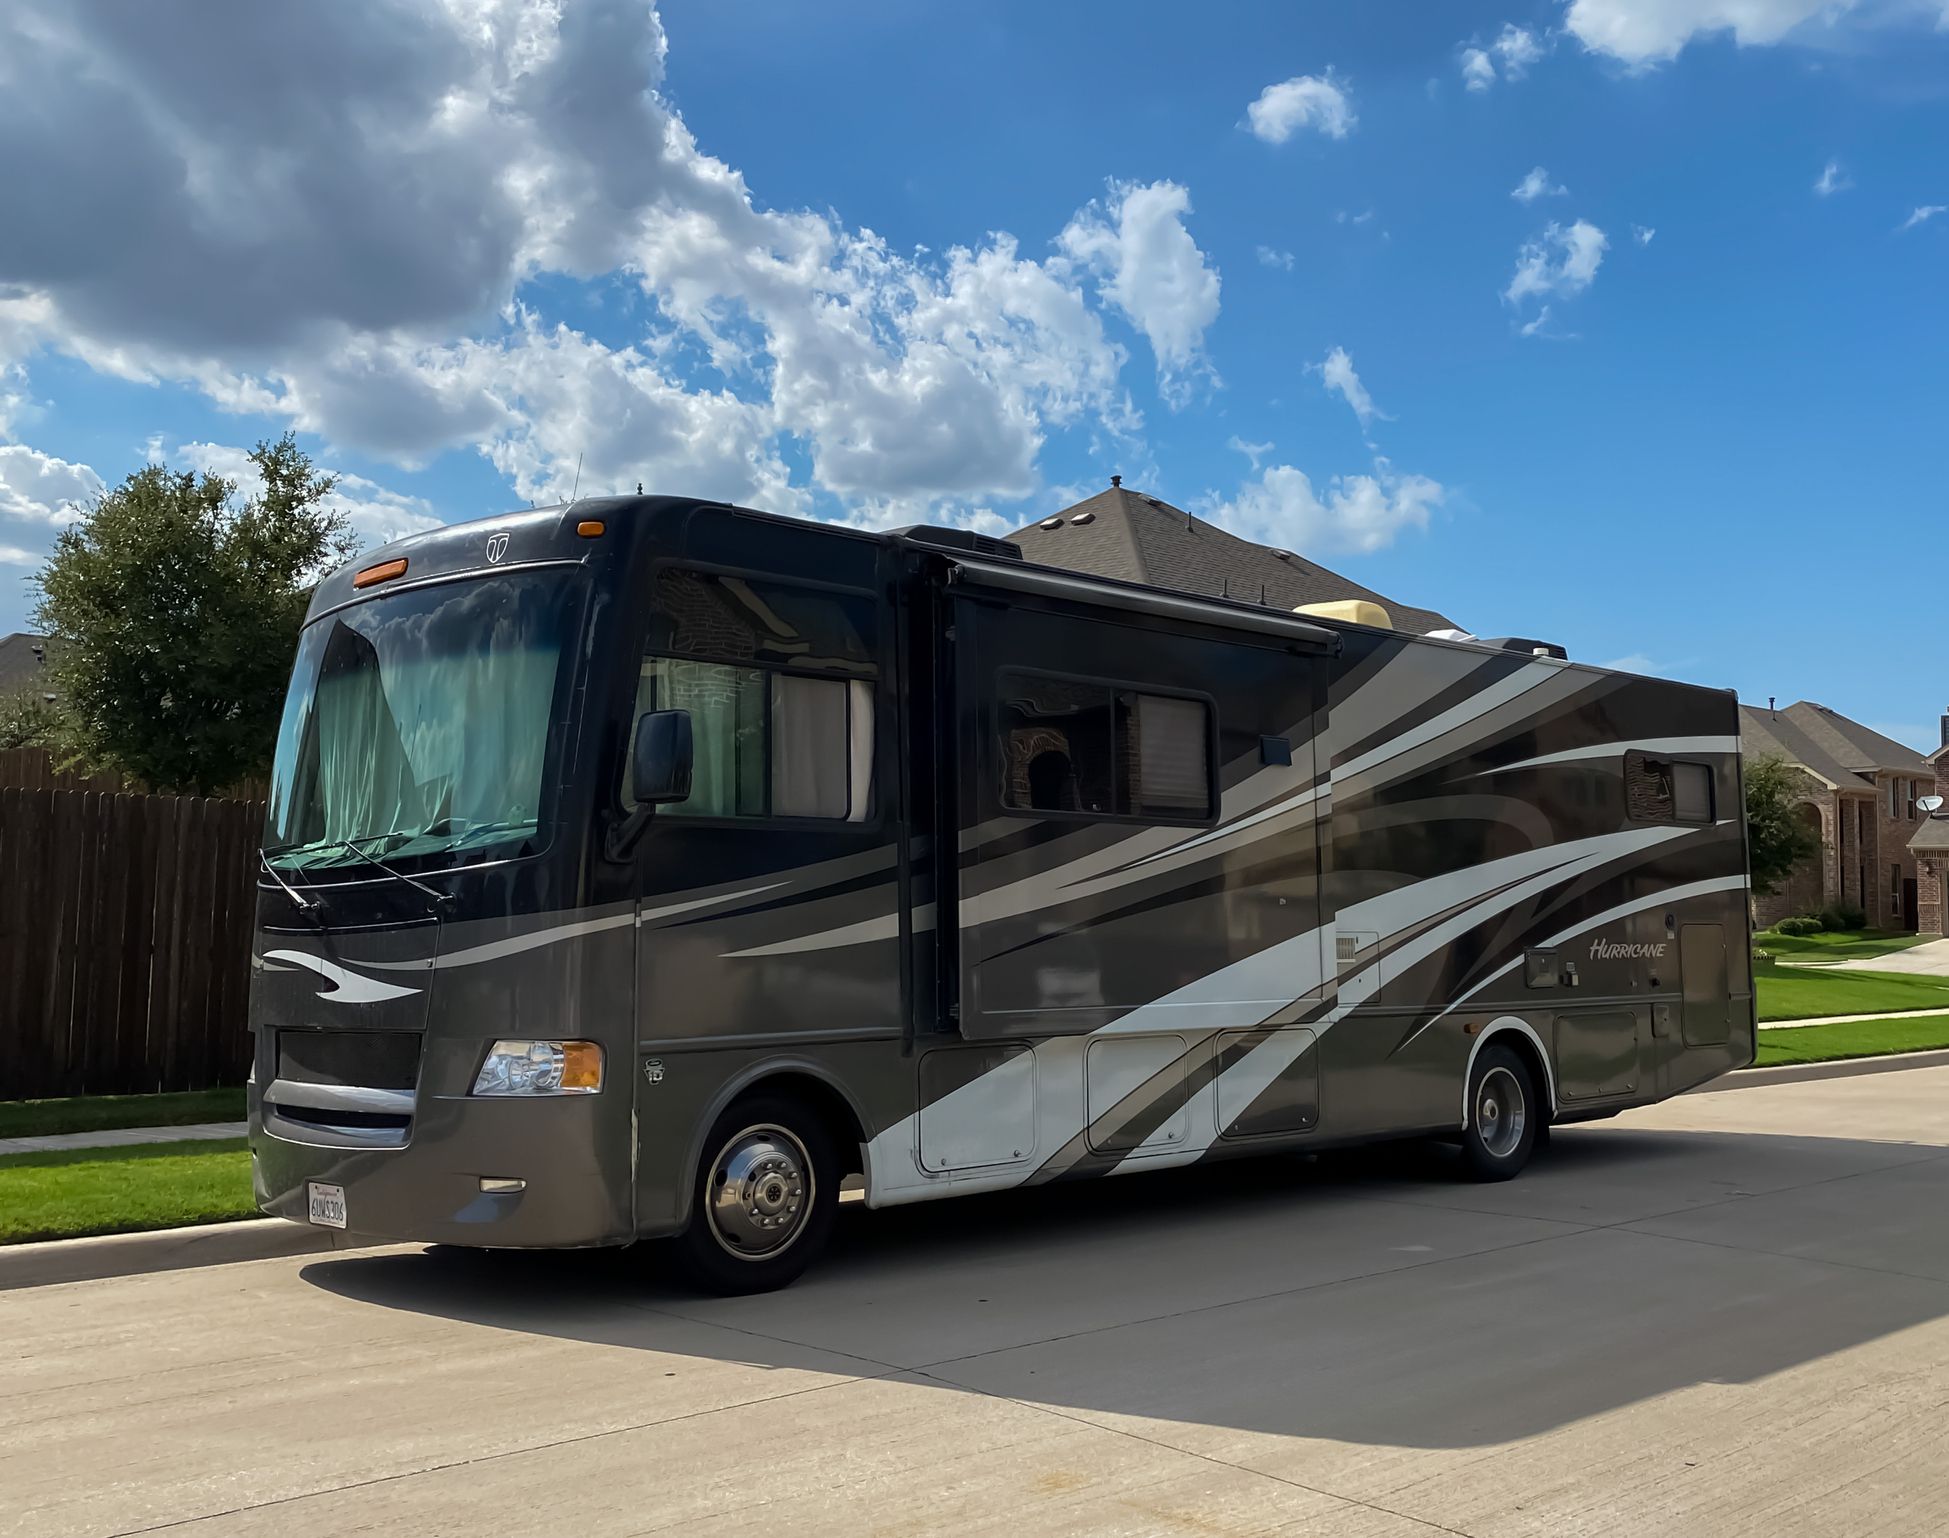 <p>According to the KOA report, 52% of new RVers report wanting to upgrade their rig. Many may have started out with lower-cost models as a way to “test the waters.” Many RVers report <a href="https://blog.cheapism.com/38-things-new-rv-owners-wished-theyd-known-buying-rv/">wishing they had known more before buying their first RV</a>.</p>